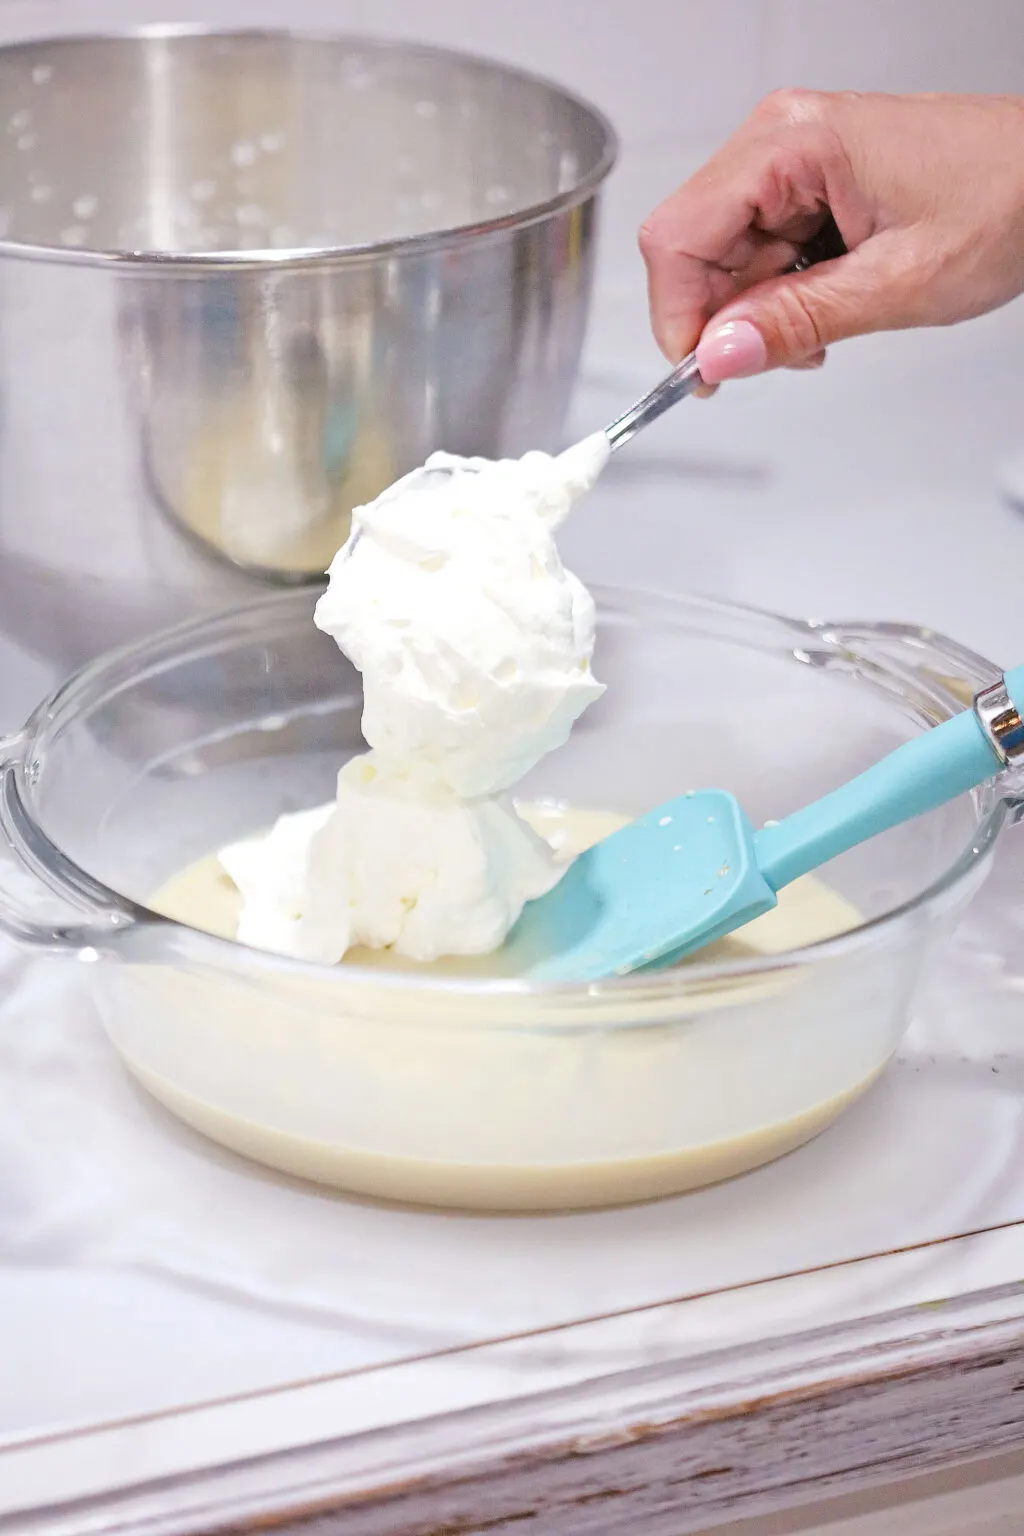 whipped cream being put into glass bowl